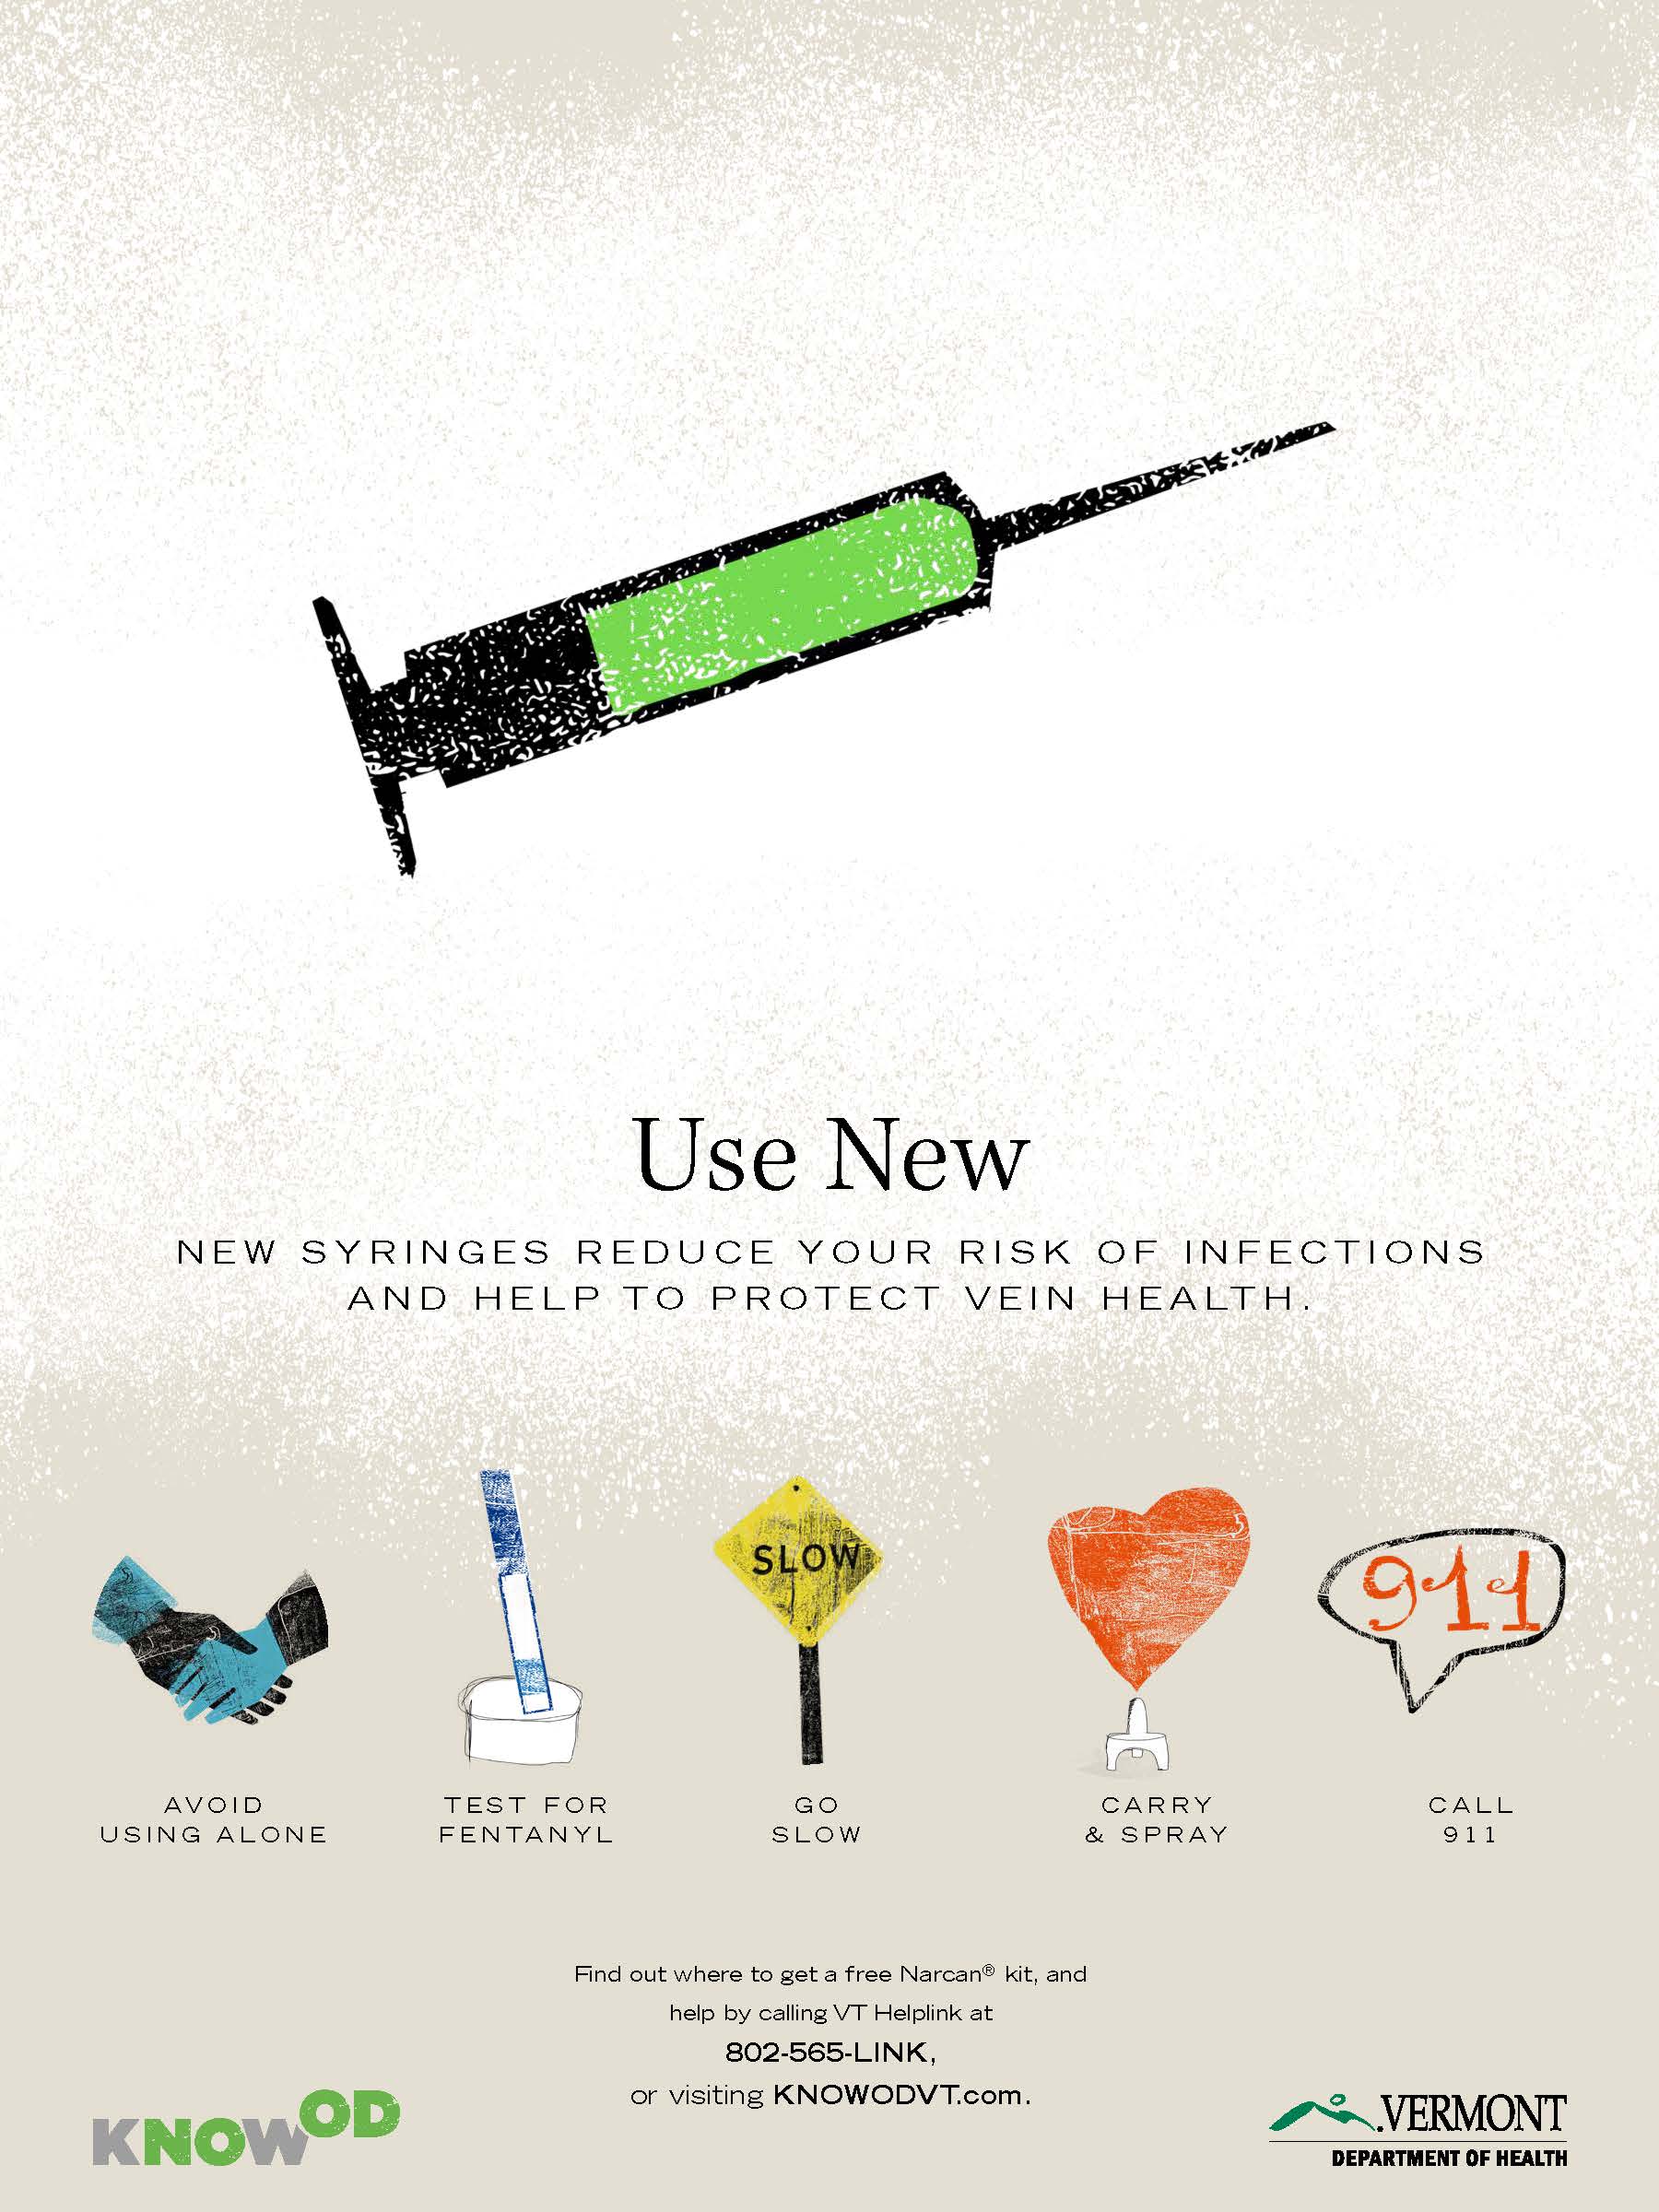 Know OD use new syringes poster